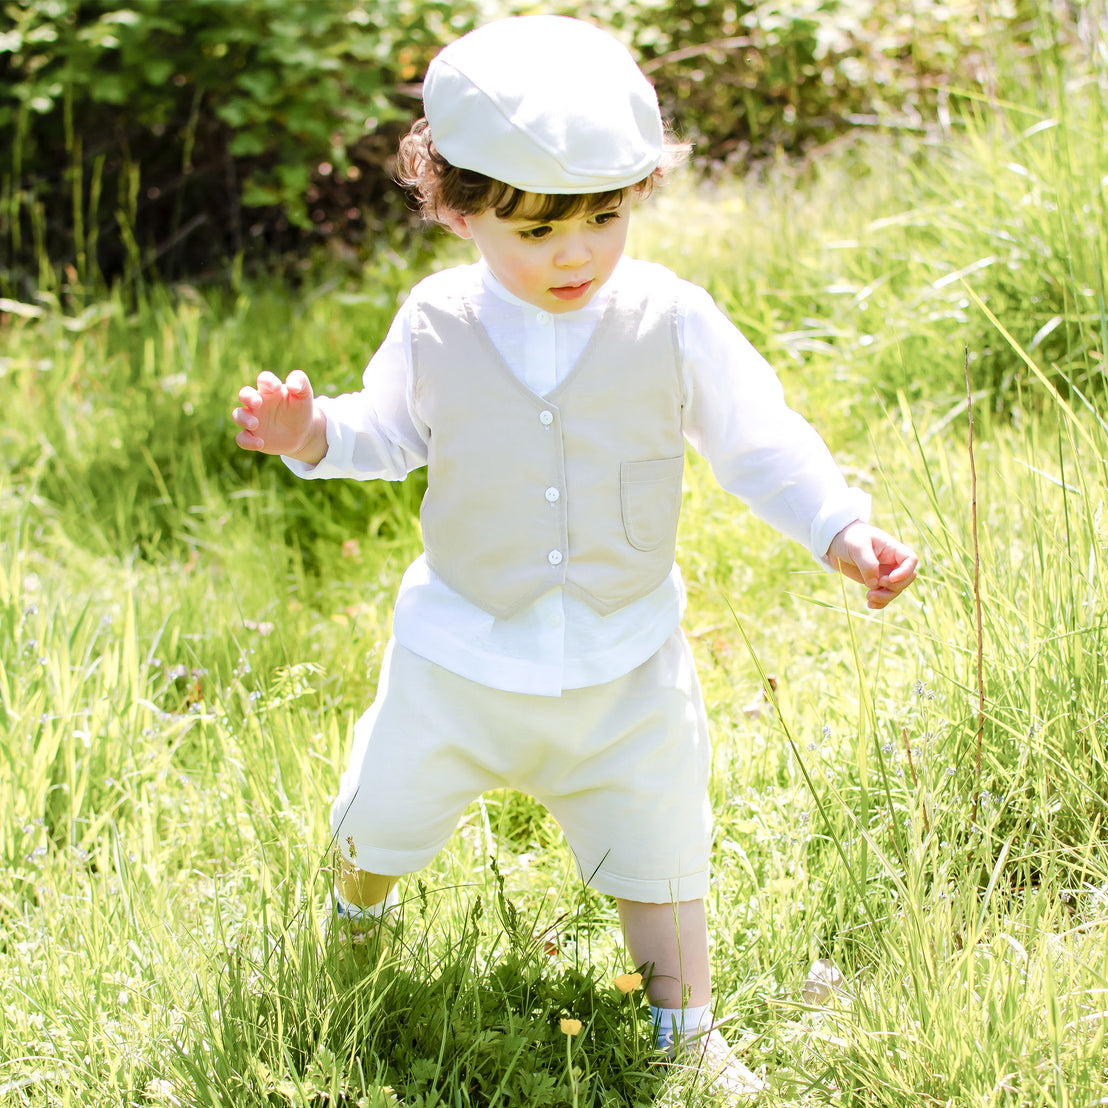 Photo of a baby boy outside in the forest. He is wearing the Silas Vest Suit that includes the vest, shorts, and onesie. He is also wearing the matching Silas newsboy cap